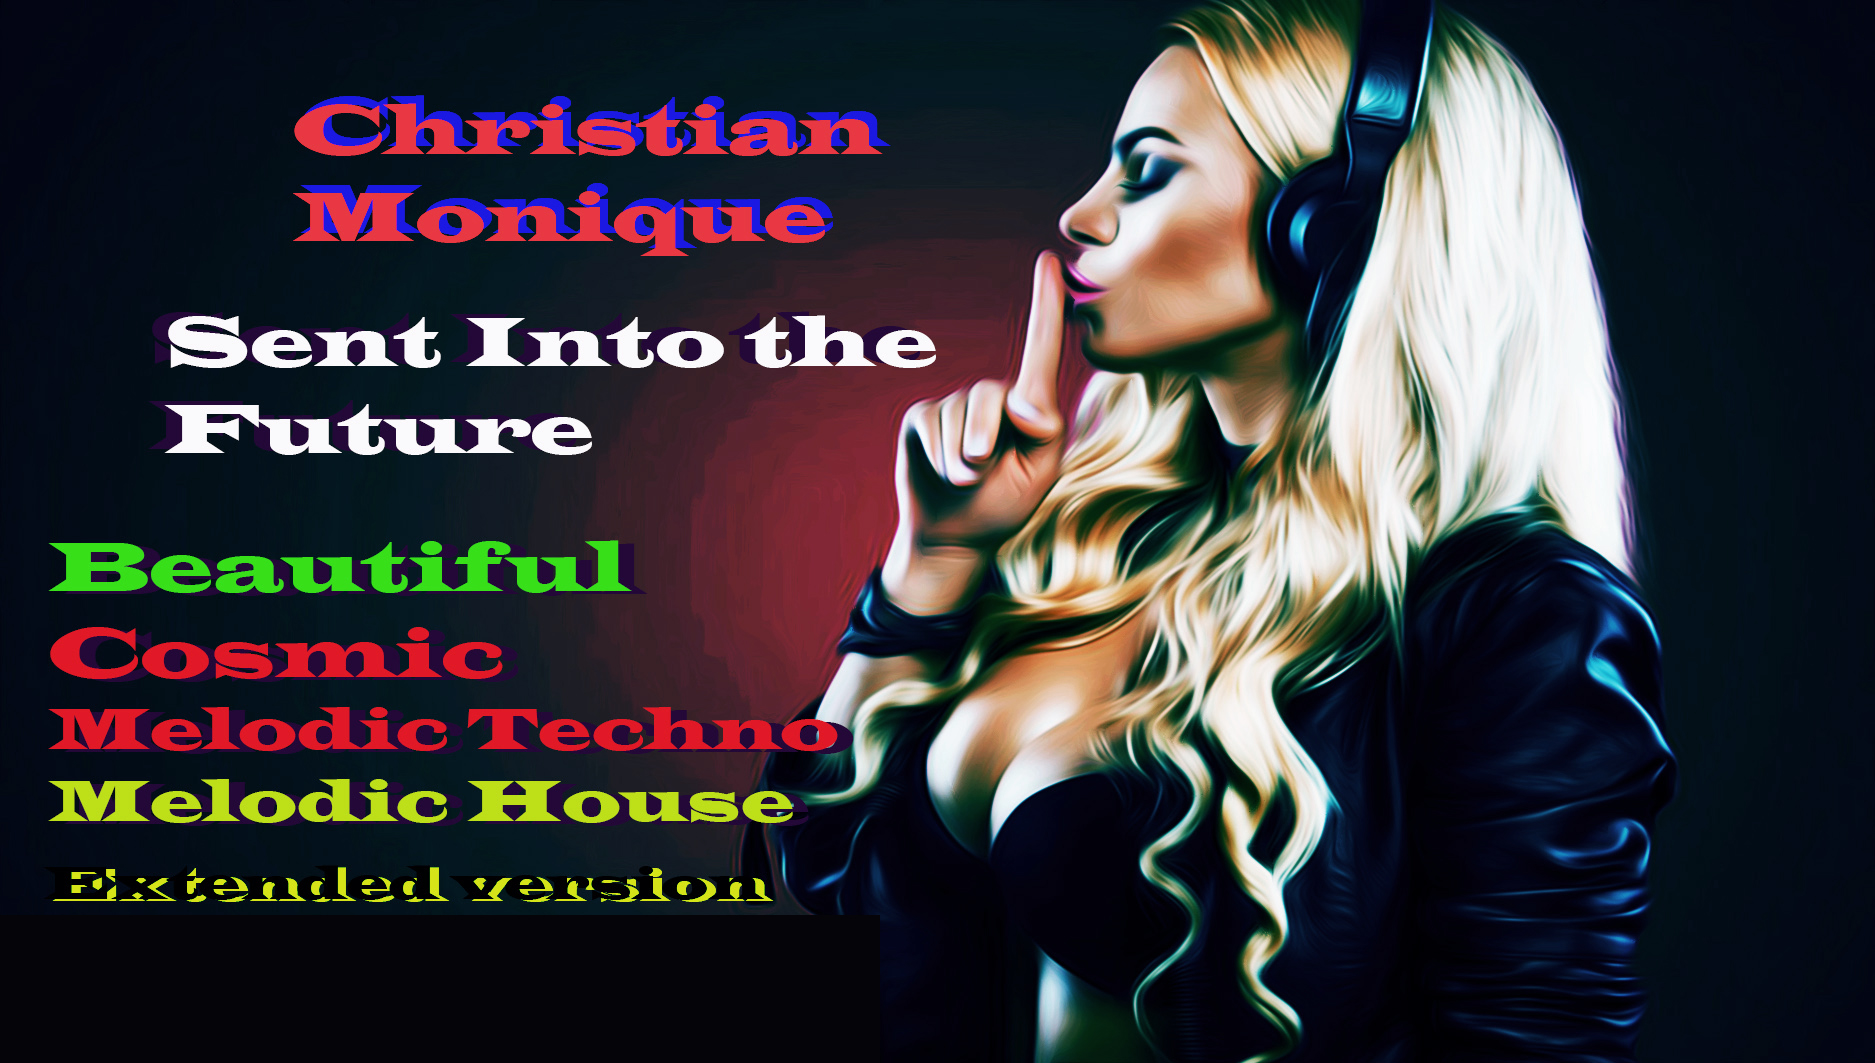 Christian Monique - Sent Into the Future (Melodic House&Melodic Techno,Extended Version) #22 .mp4